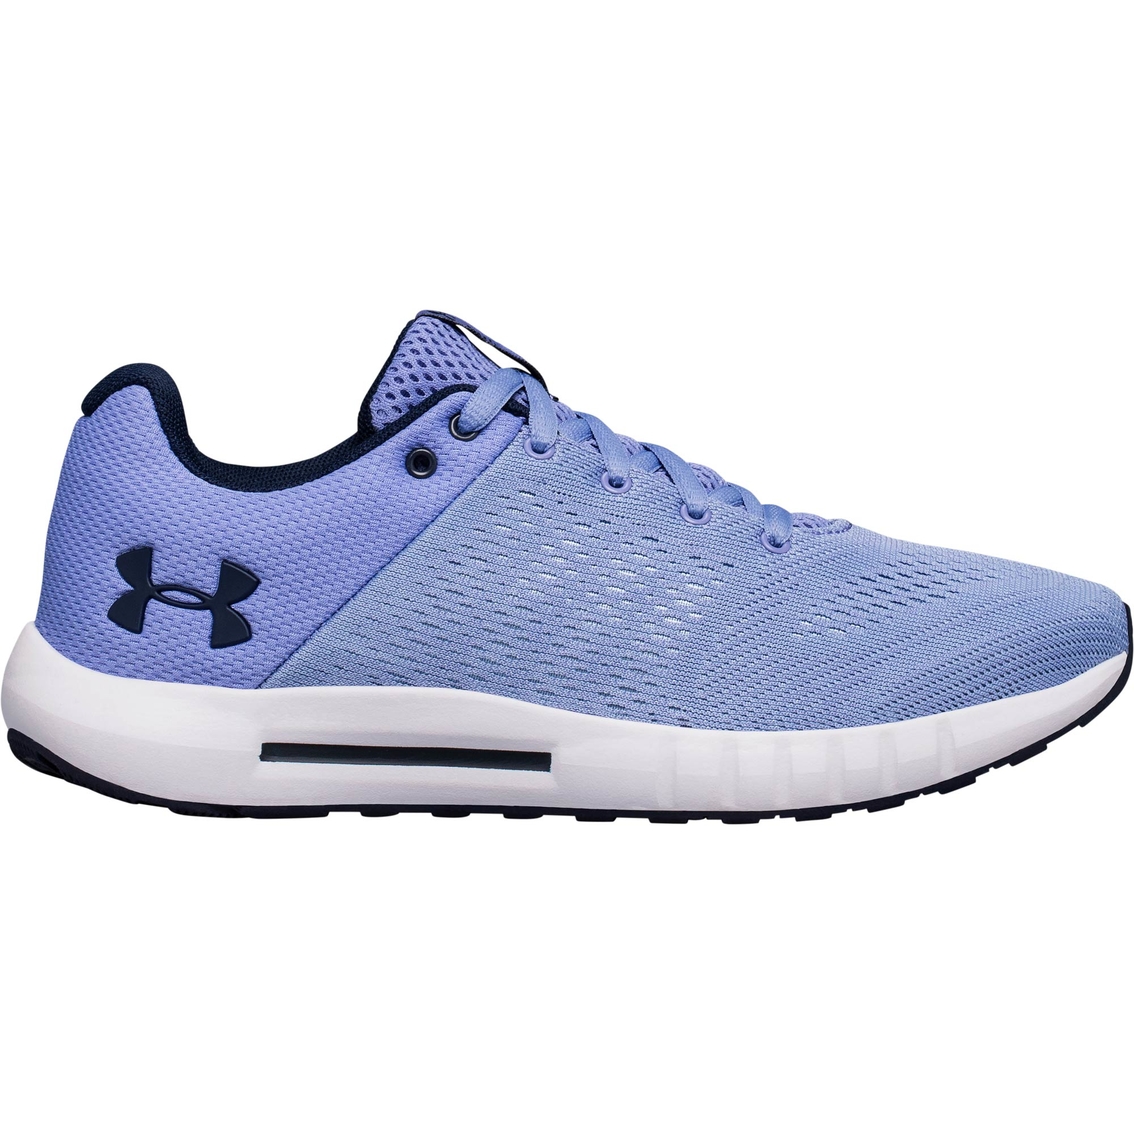 under armour women's shoes cross training